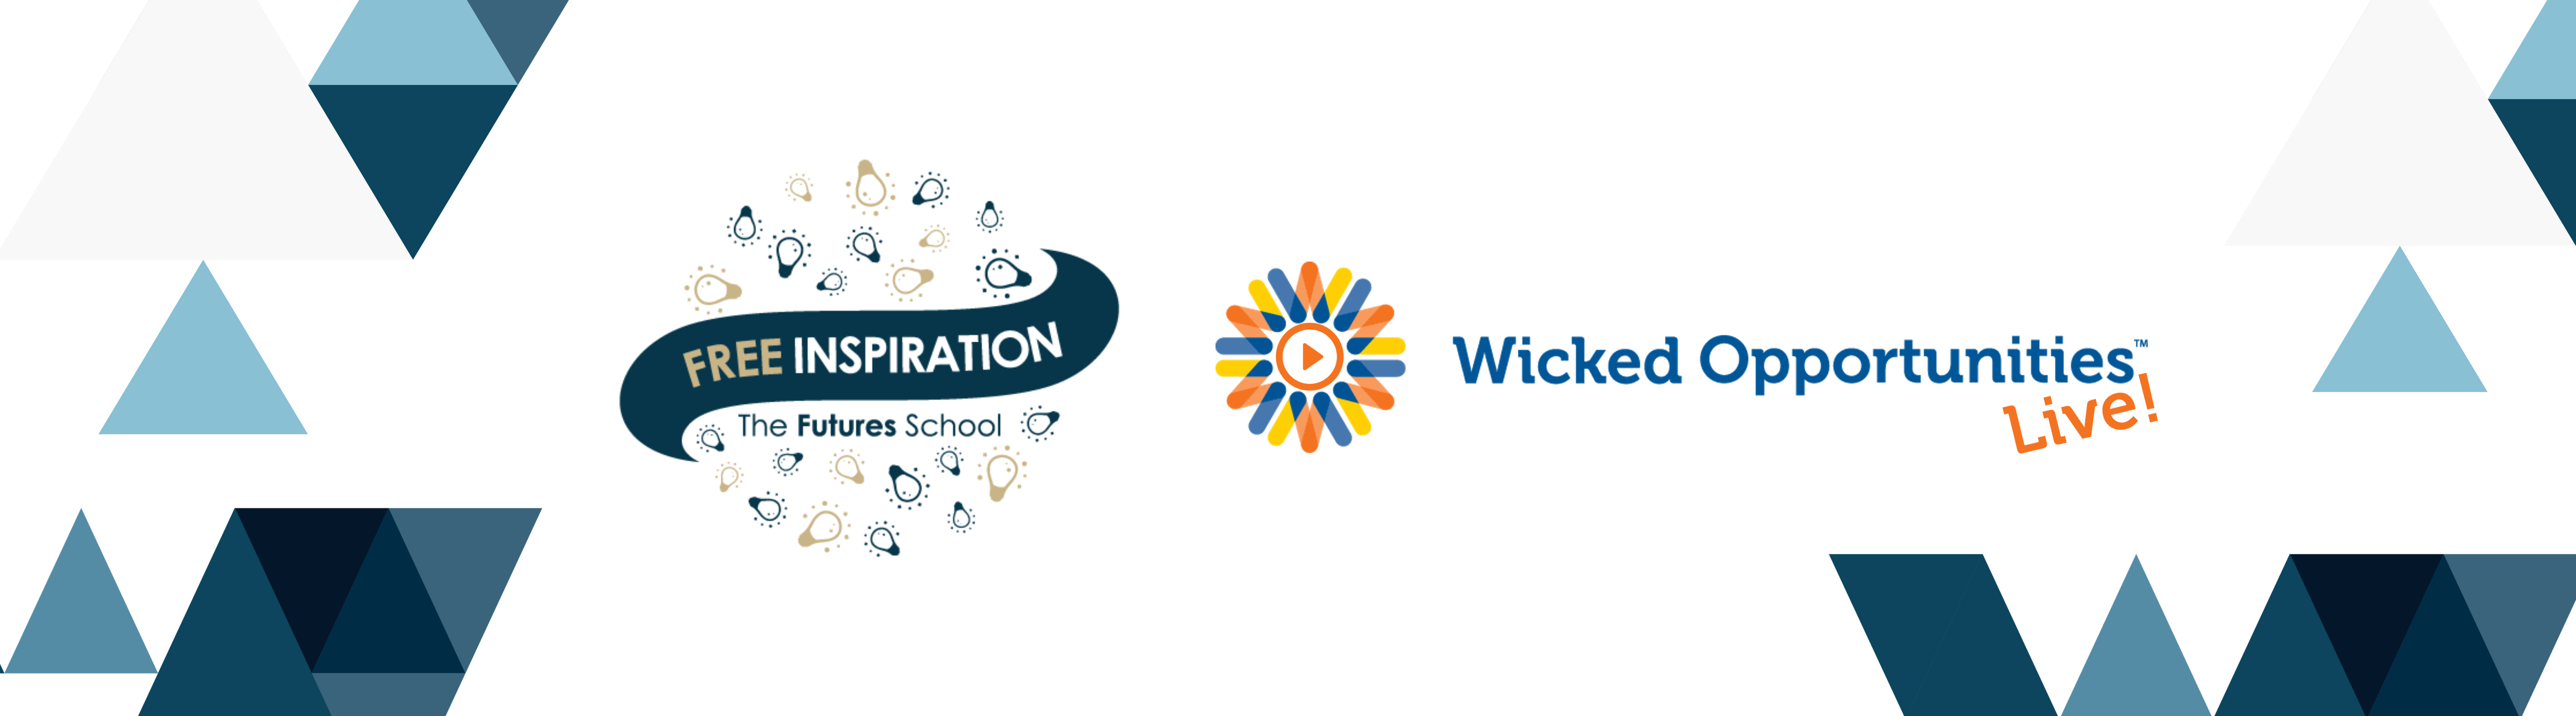 Free Inspiration from the Futures School. Wicked Opportunities Live!